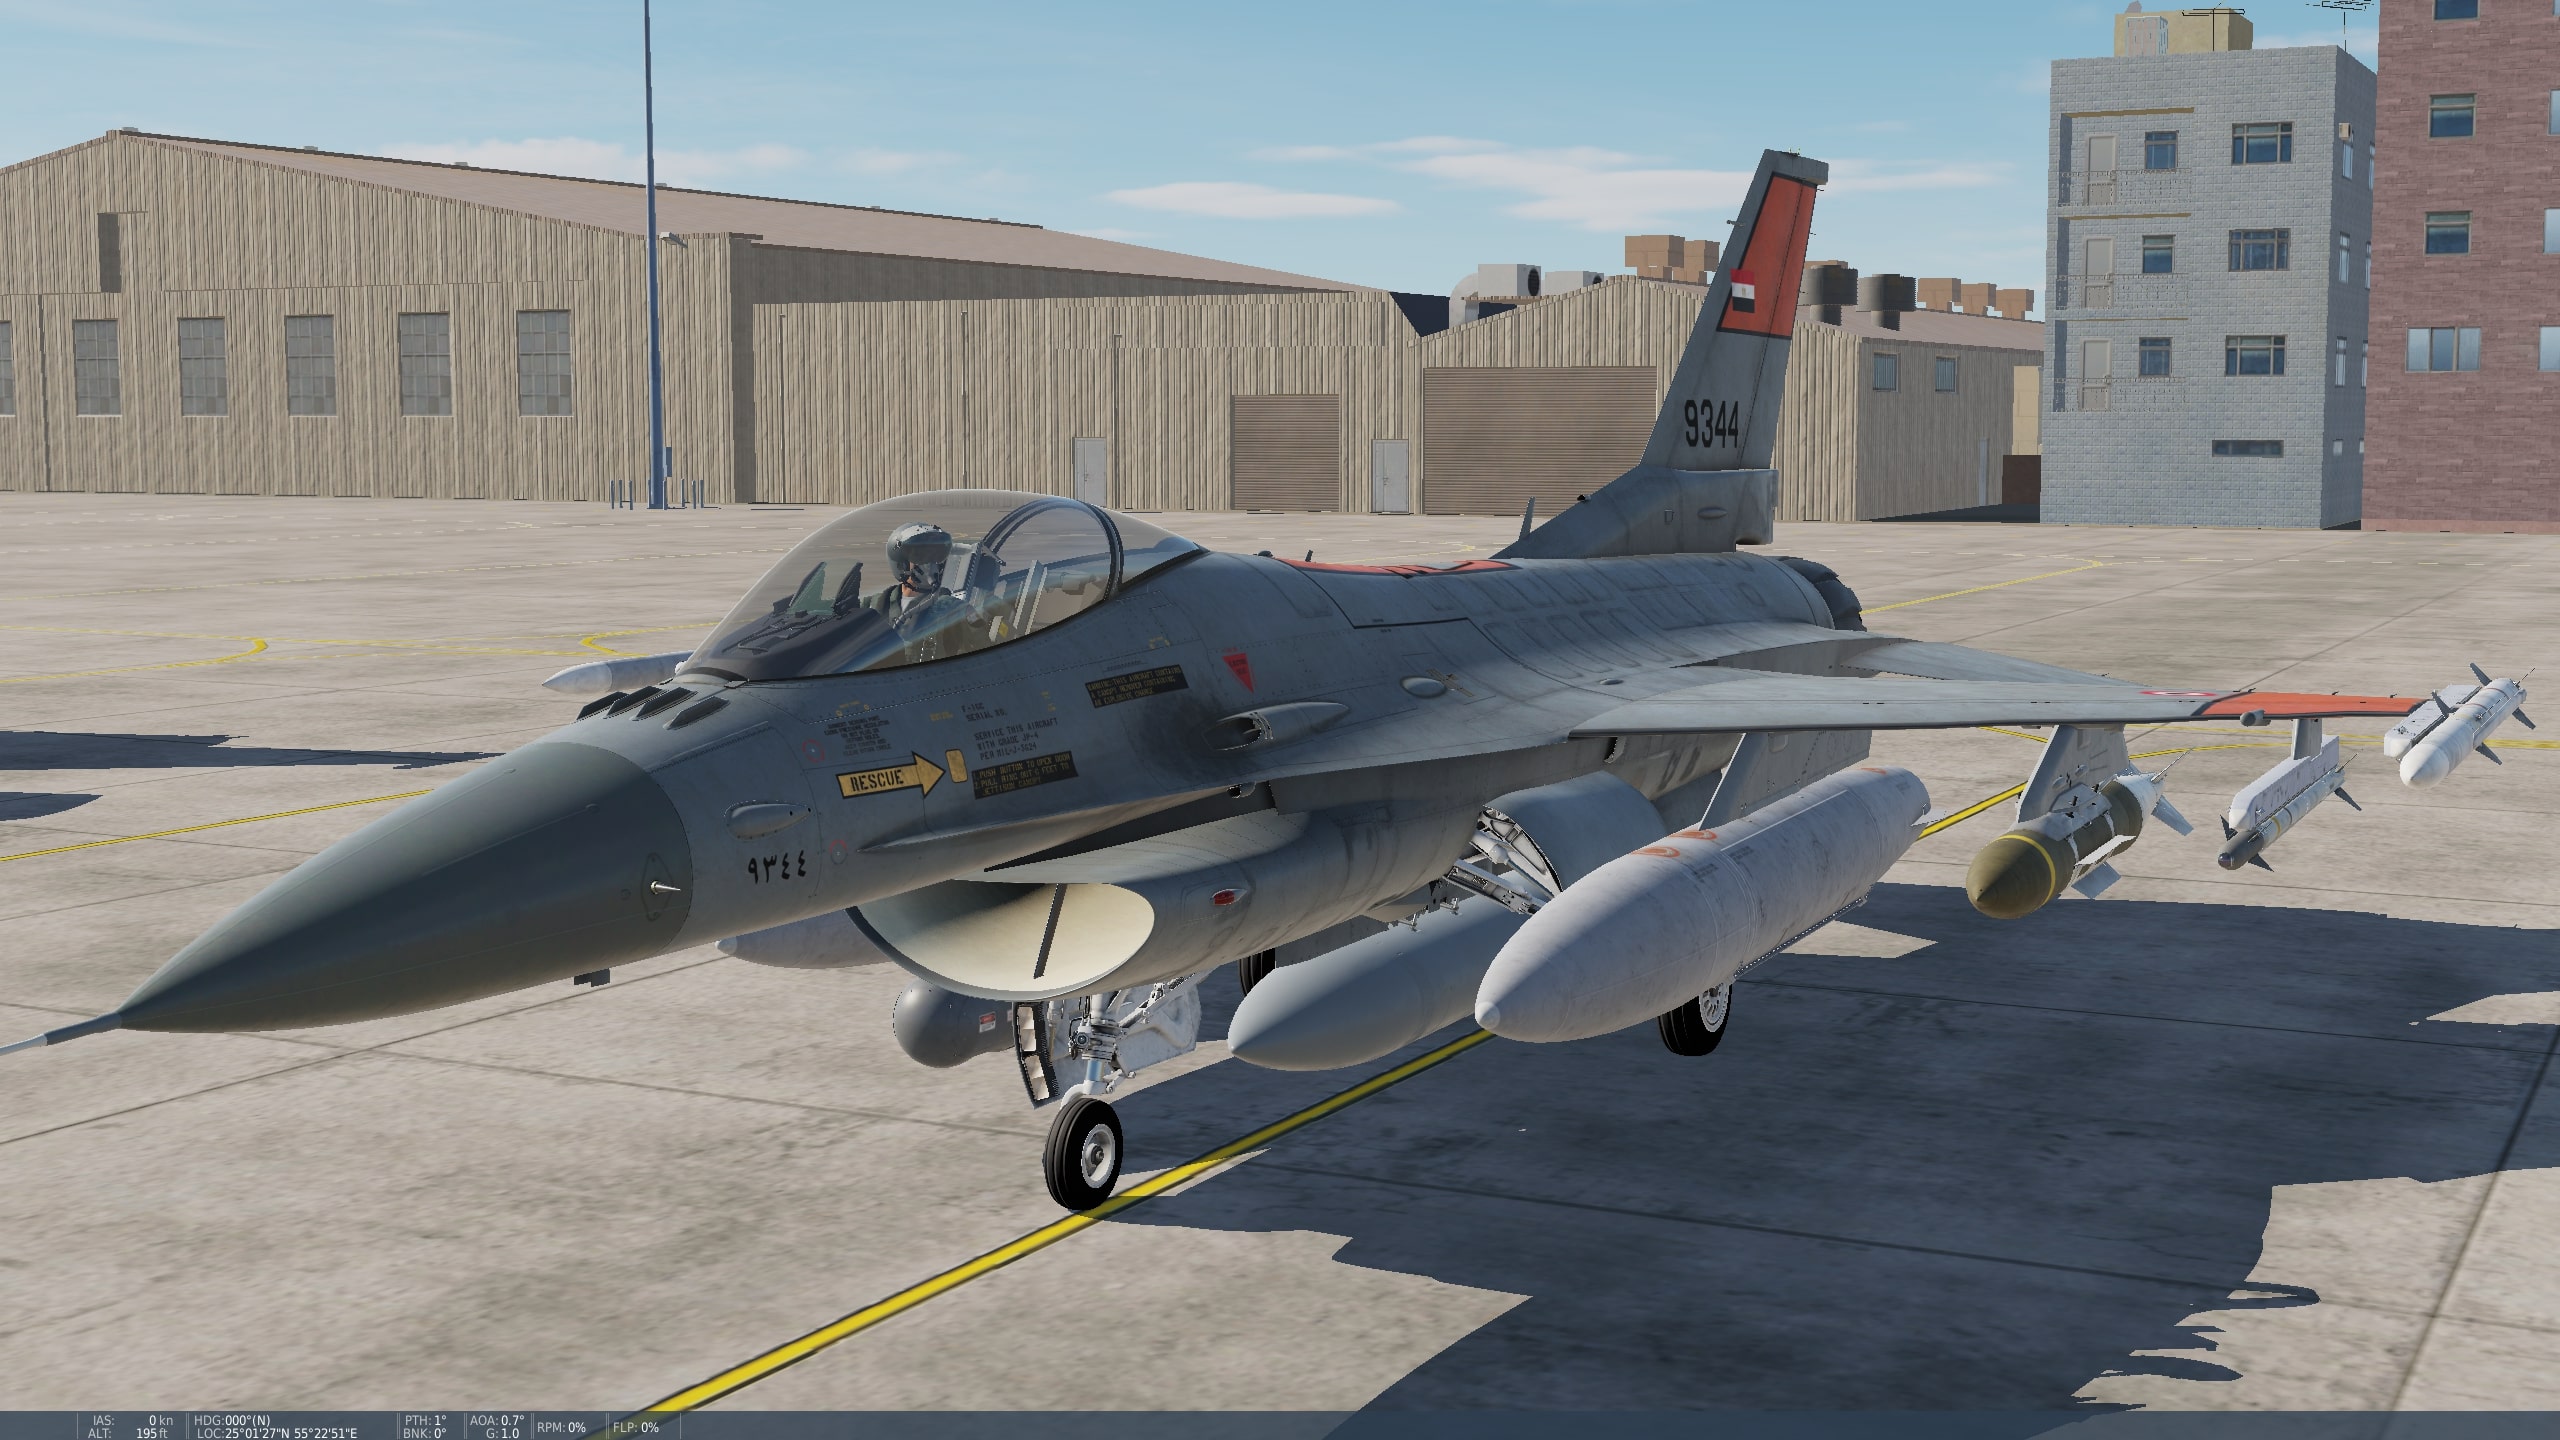 Egyptian Air Force Realistic F-16 Block 40 